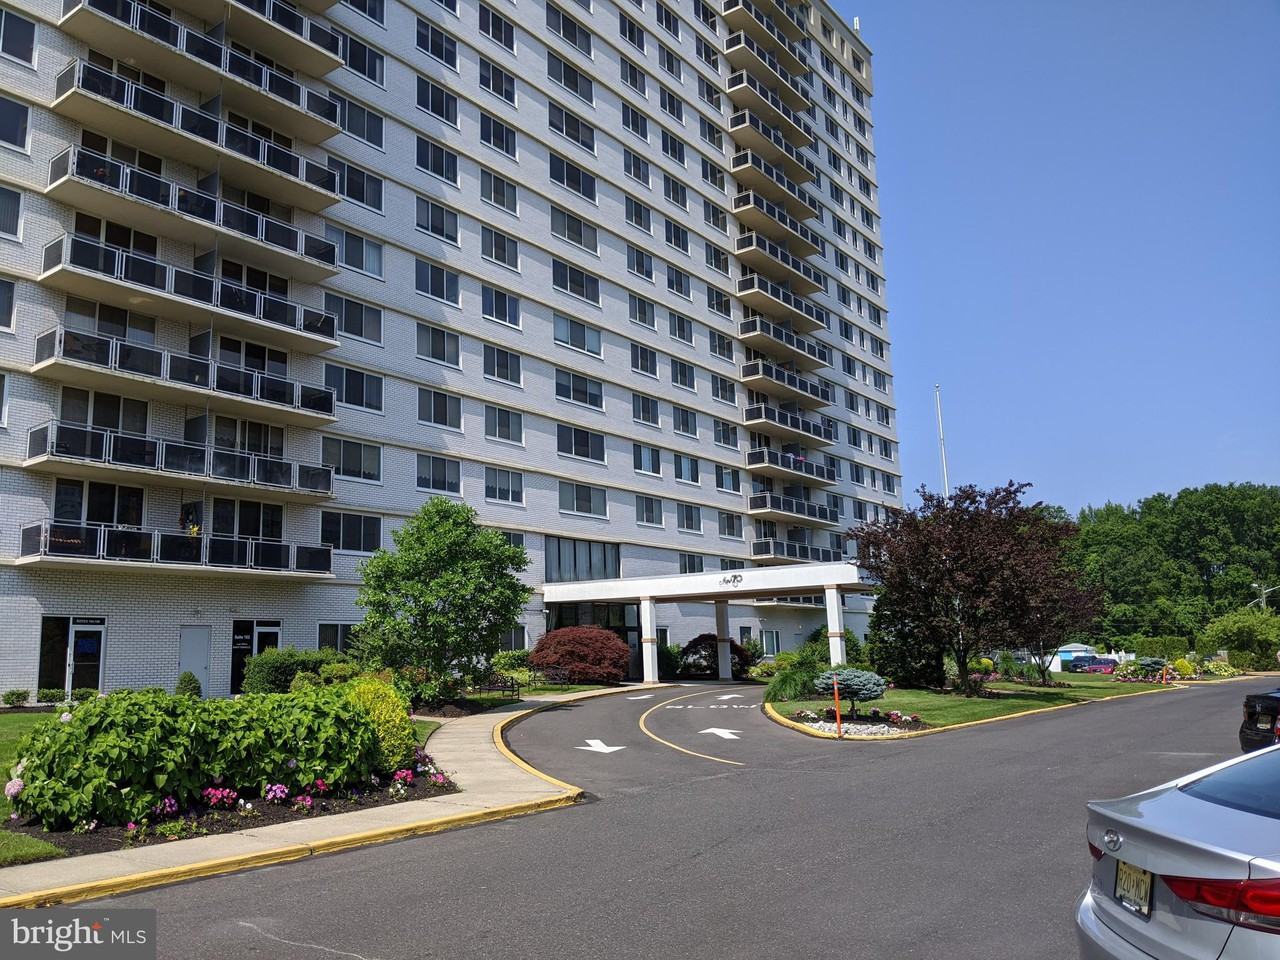 1840 Frontage Rd #1005, Cherry Hill, NJ 08034 2 Bedroom ...